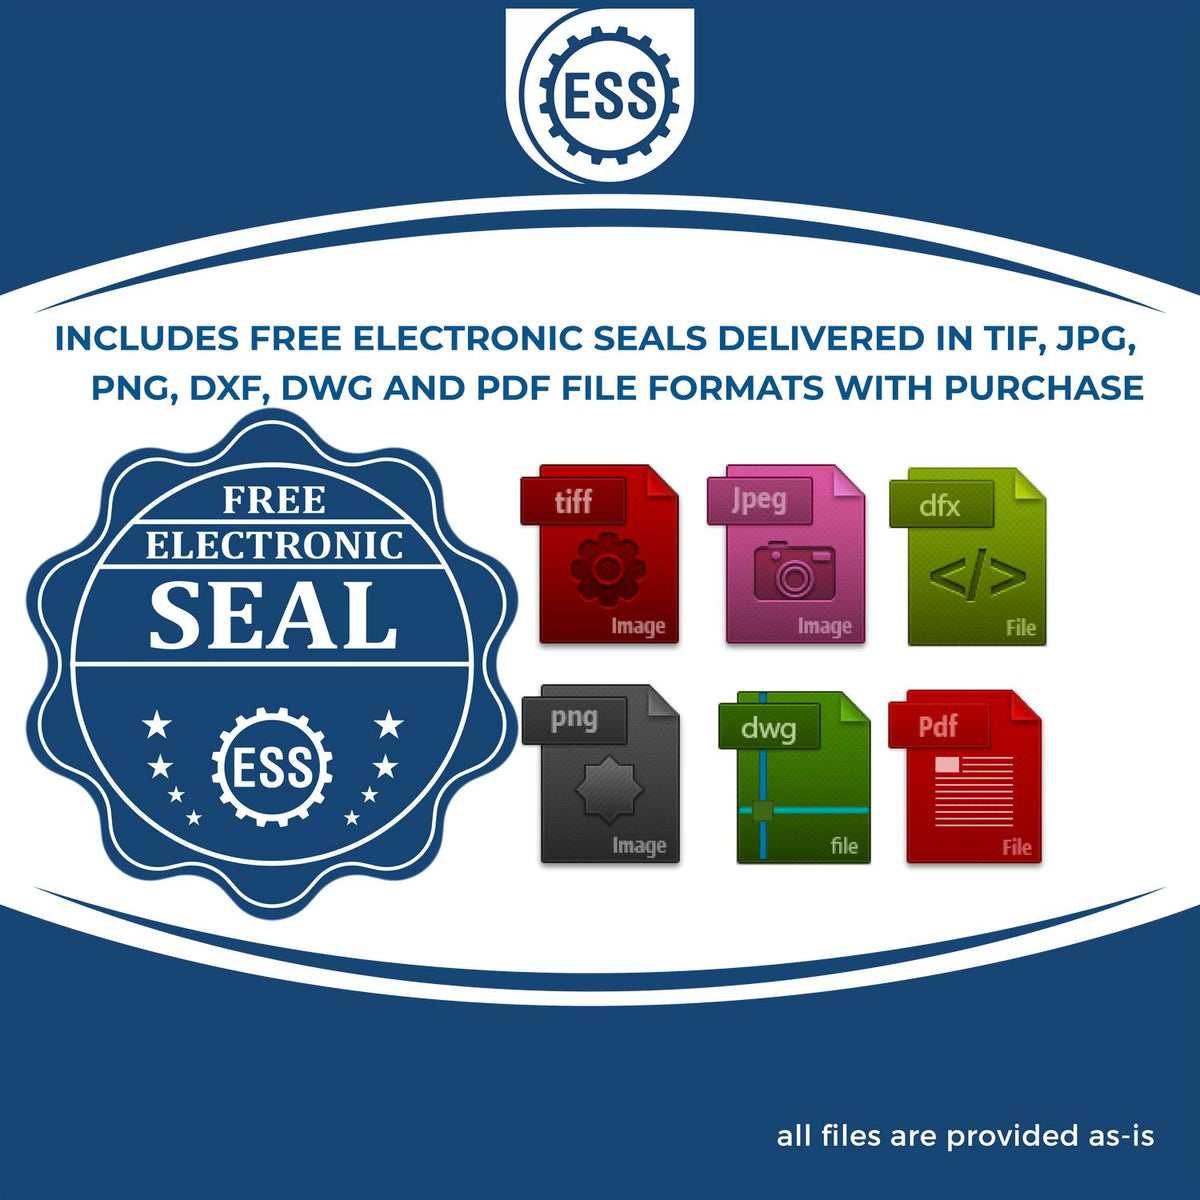 An infographic for the free electronic seal for the Heavy Duty Cast Iron South Dakota Architect Embosser illustrating the different file type icons such as DXF, DWG, TIF, JPG and PNG.